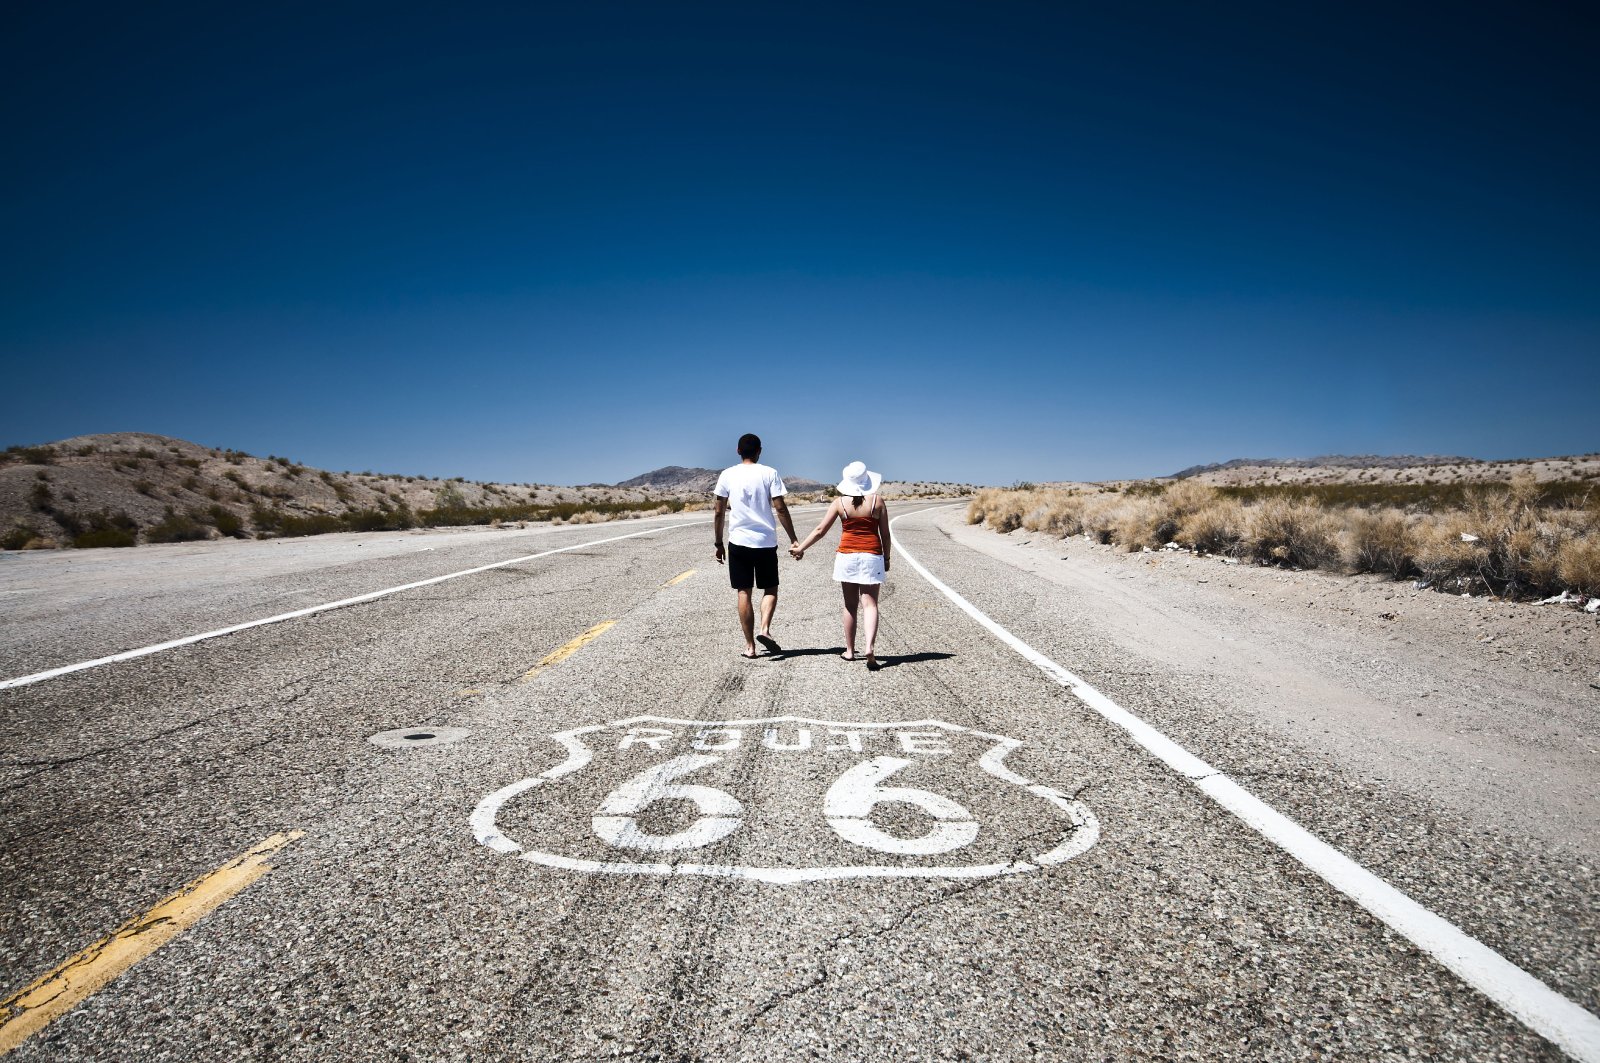 <p class="wp-caption-text">Image Credit: Shutterstock / donvictorio</p>  <p><span>Route 66, the iconic highway that once connected Chicago to Los Angeles, is rich in American history, nostalgia, and, purportedly, the supernatural. This legendary path, often called “The Mother Road,” is dotted with haunted motels, deserted towns, and mysterious landmarks that have accumulated ghostly tales over decades. From the restless spirits of the Old West in Oatman, Arizona, to the ghostly occurrences at the Monte Vista Hotel in Flagstaff, travelers on Route 66 embark on a journey through America’s heartland and its haunted past. The road offers an incomparable adventure for those looking to explore the folklore that America’s expansion westward left behind.</span></p> <p><b>Insider’s Tip:</b><span> Stop by the historic town of Jerome, Arizona, now a thriving artist community but once known as the “Wickedest Town in the West.” Its haunted tours are especially captivating.</span></p> <p><b>When to Travel:</b><span> Spring and fall offer the most comfortable conditions for this cross-country journey, avoiding the extreme temperatures of summer and winter.</span></p> <p><b>How to Get There:</b><span> While the original Route 66 has been decommissioned, much of it runs parallel to Interstate 40. Start in Chicago, following Historic Route 66 signs through Illinois, Missouri, Kansas, Oklahoma, Texas, New Mexico, Arizona, and finally California.</span></p>